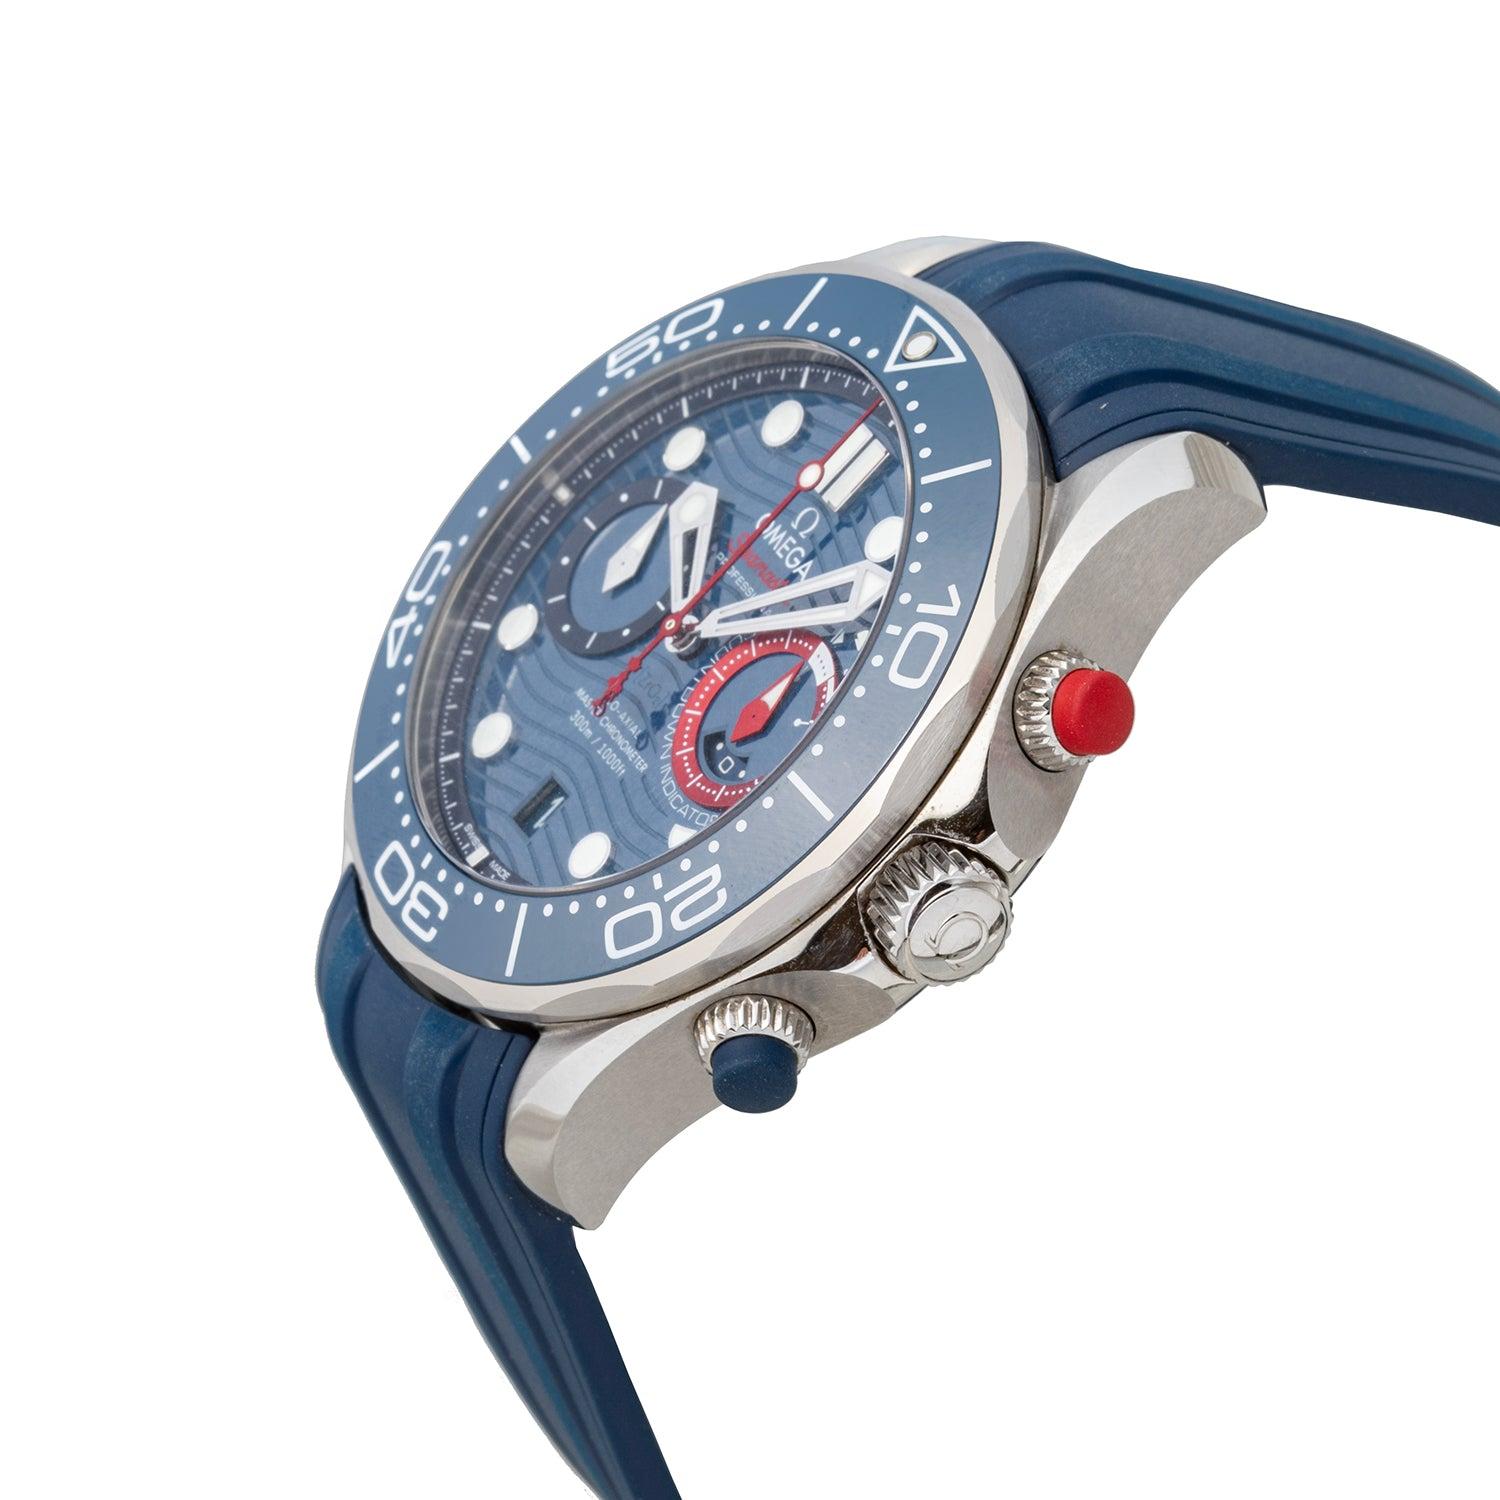 Pre-owned Omega Seamaster Diver 300M Chronograph AMERICA'S CUP 2021 (ref. 210.30.44.51.03.002), featuring the self-winding caliber 9900 co-axial movement; blue ceramic dial with laser-engraved waves; date window at 6 o'clock; regatta countdown